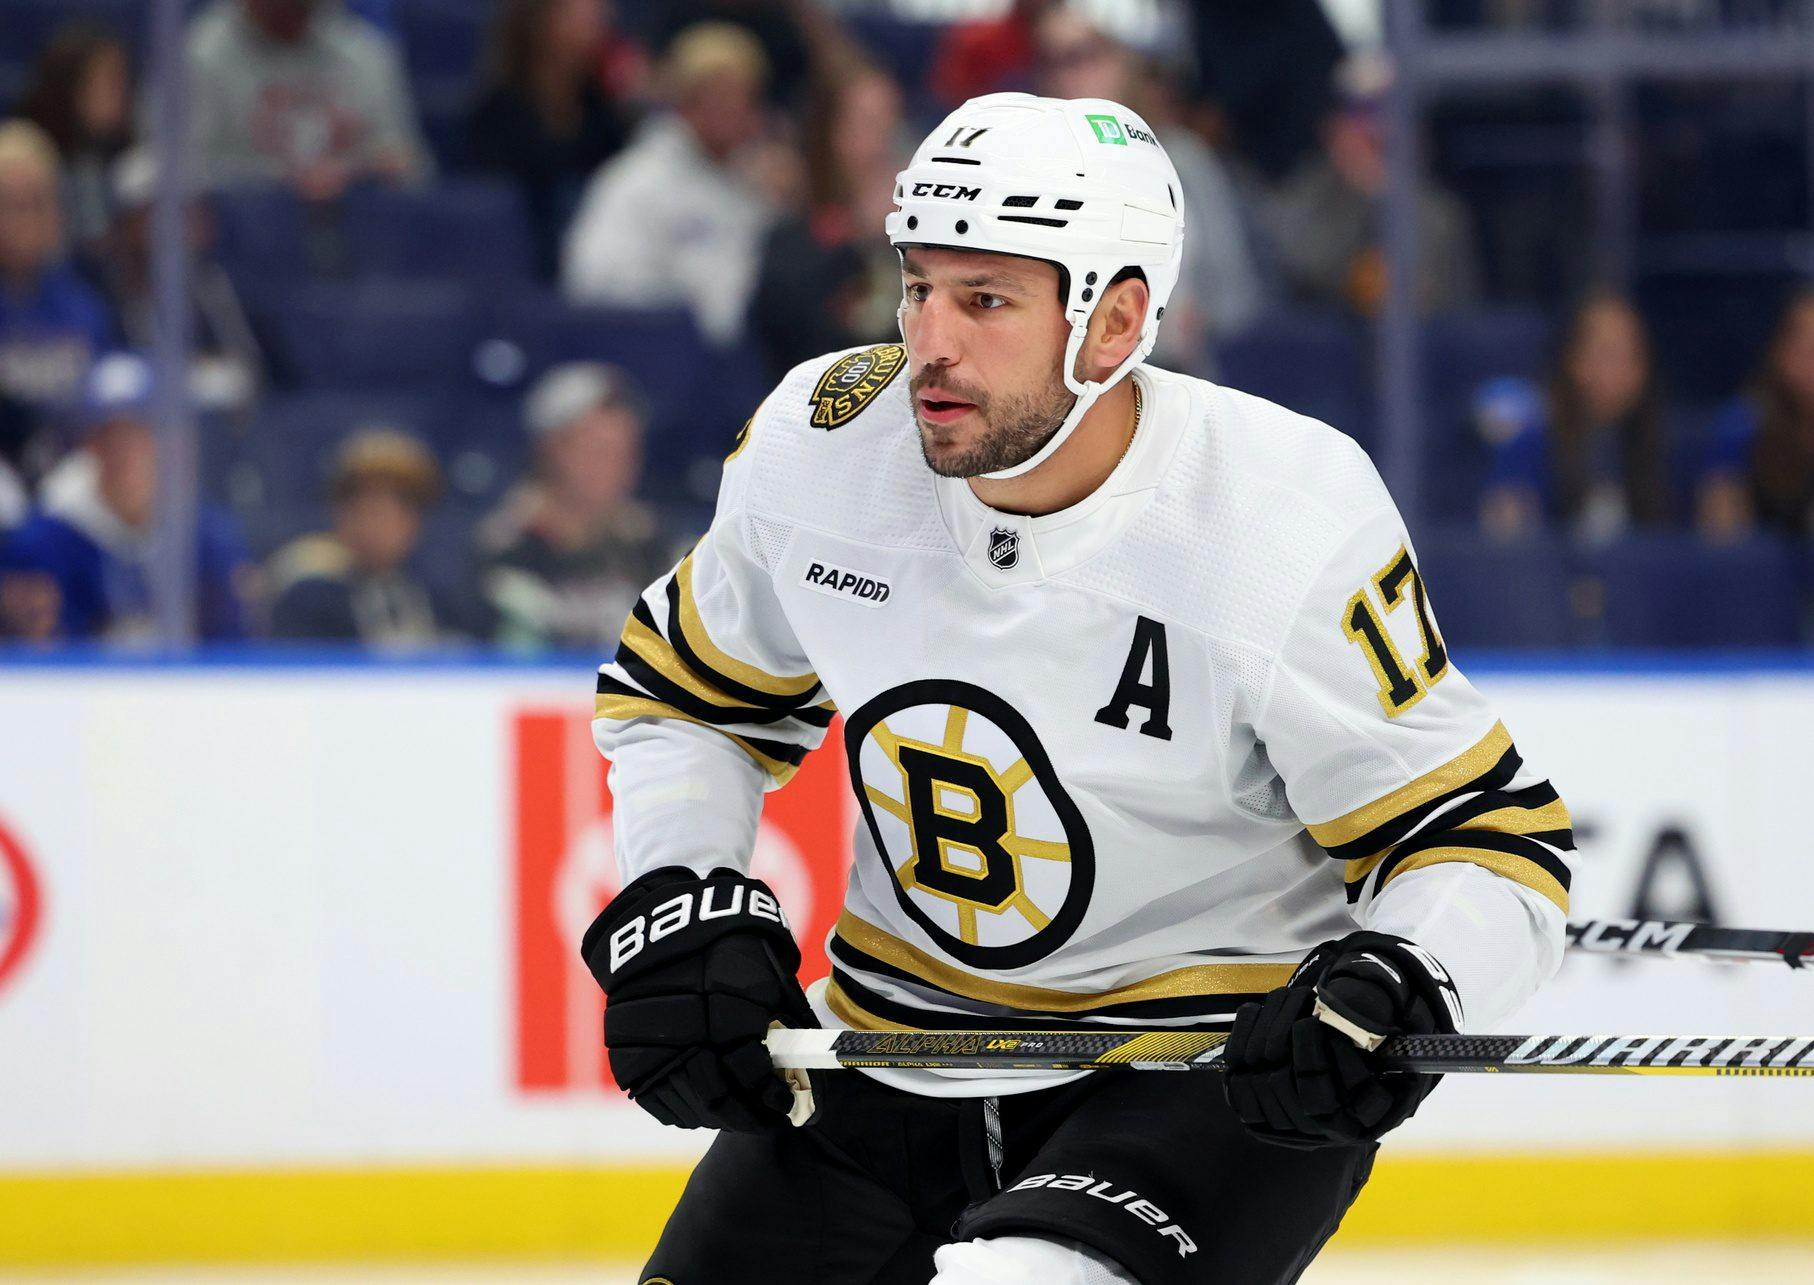 Boston Bruins’ Milan Lucic pleads not guilty to assaulting his wife, released without bail